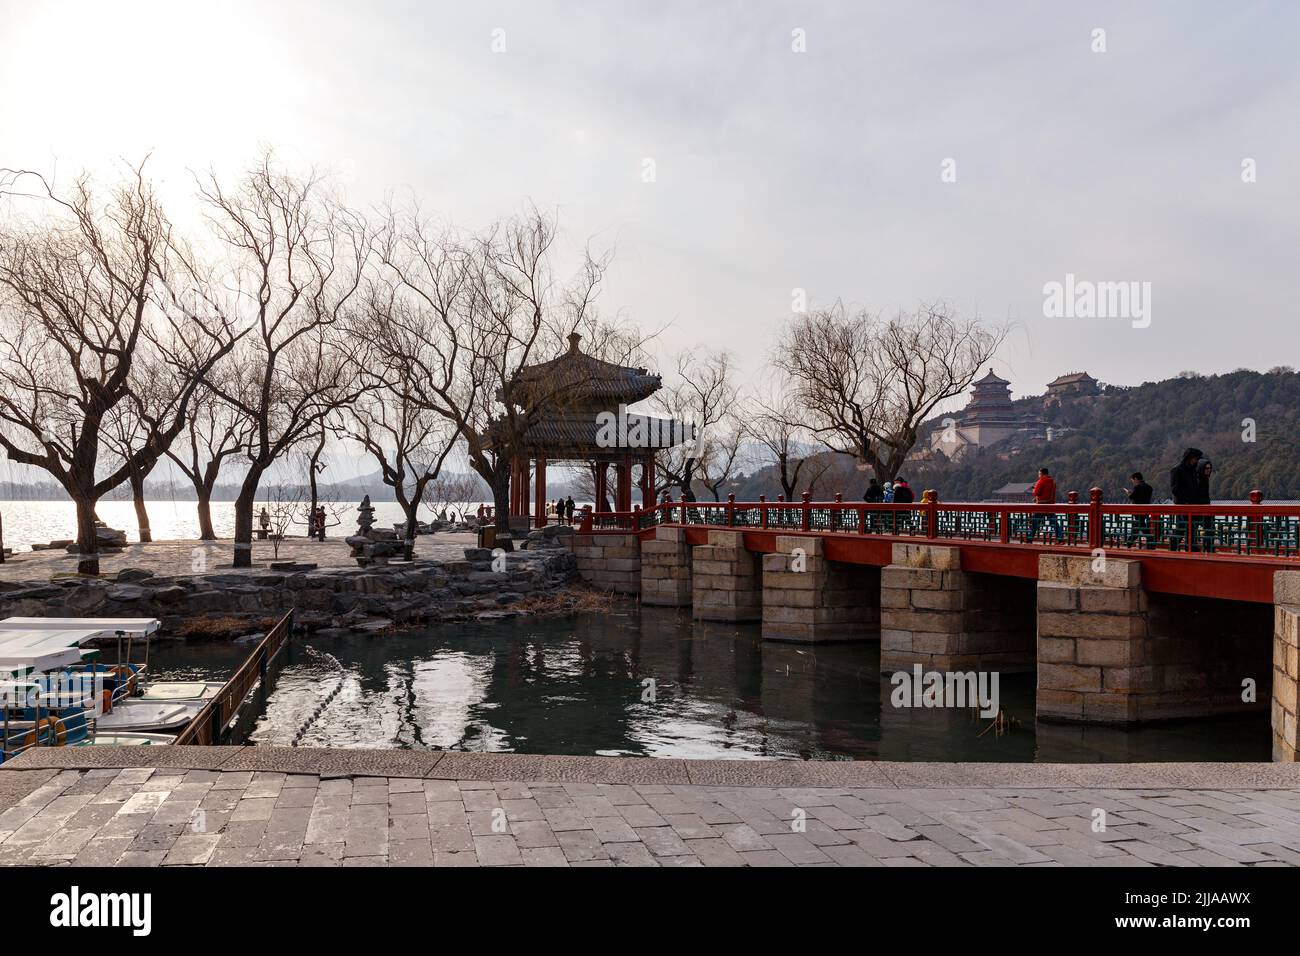 Am See am Sommerpalast in Peking, China im März 2018. Stockfoto